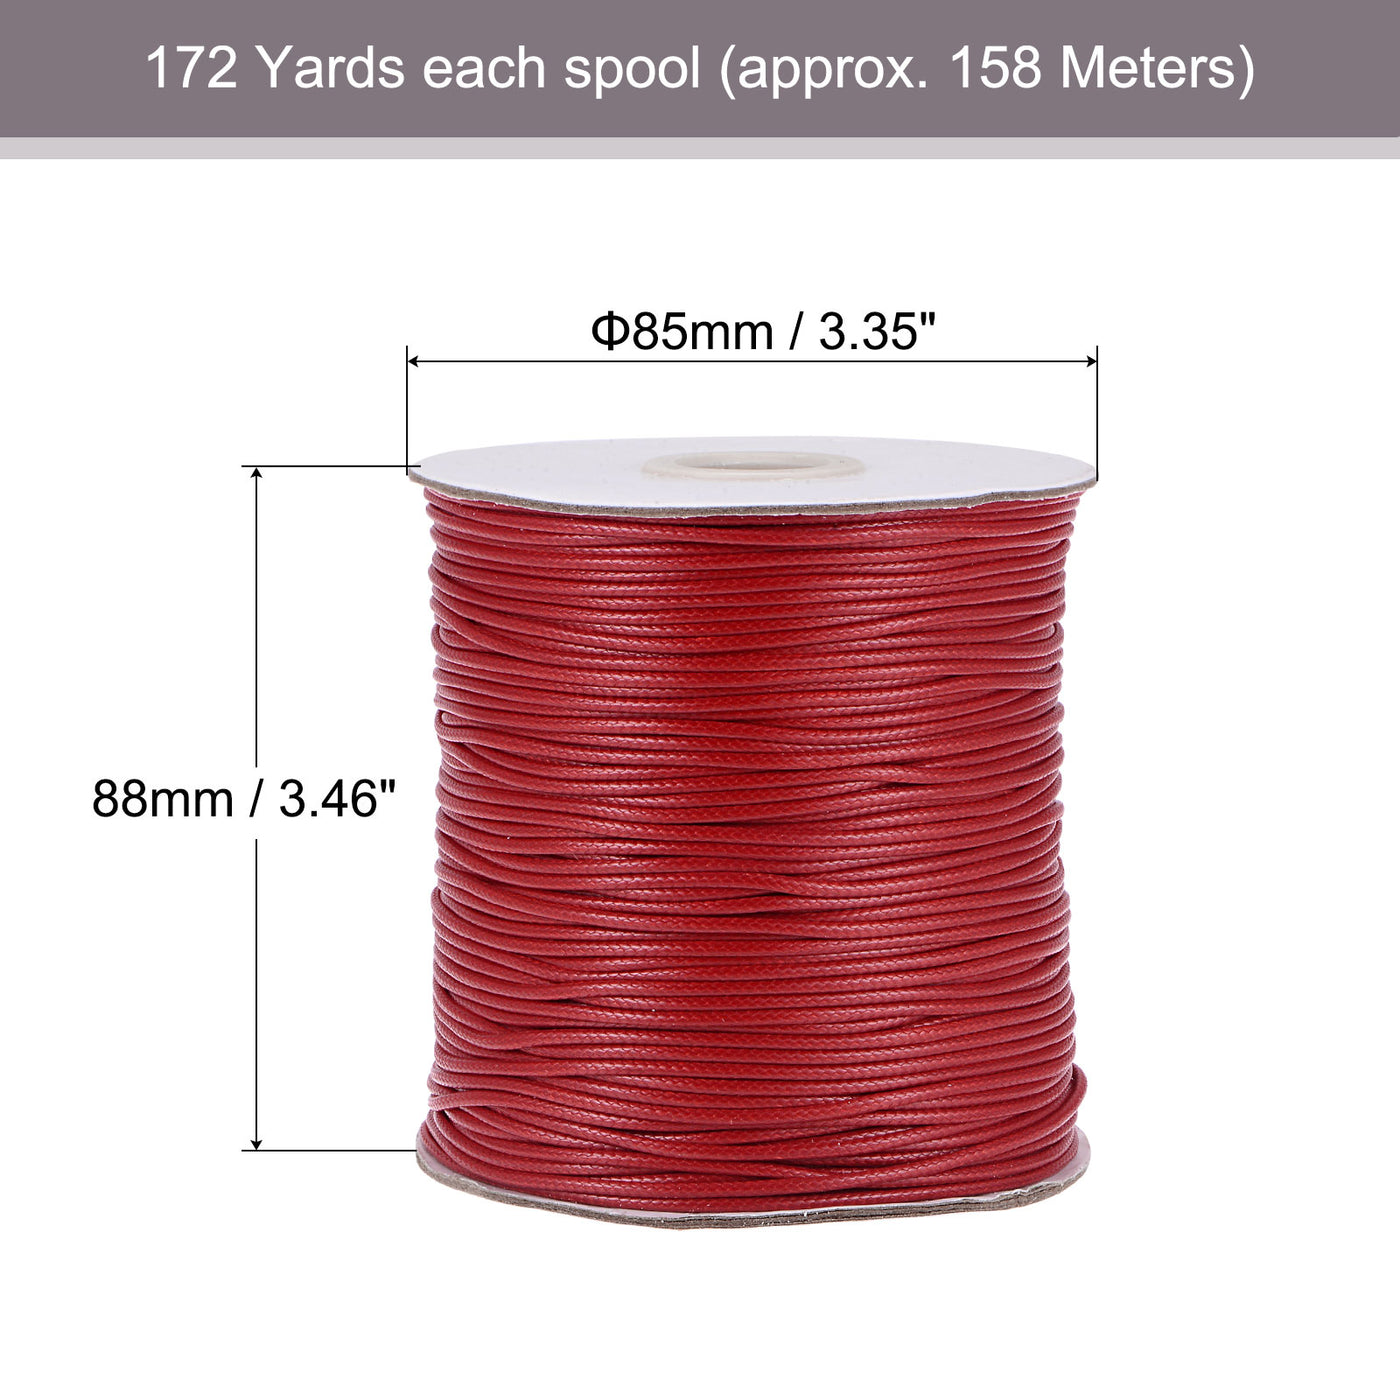 uxcell Uxcell 2pcs 1.5mm Waxed Polyester String 158M 172-Yard Beading Crafting Rope, Red